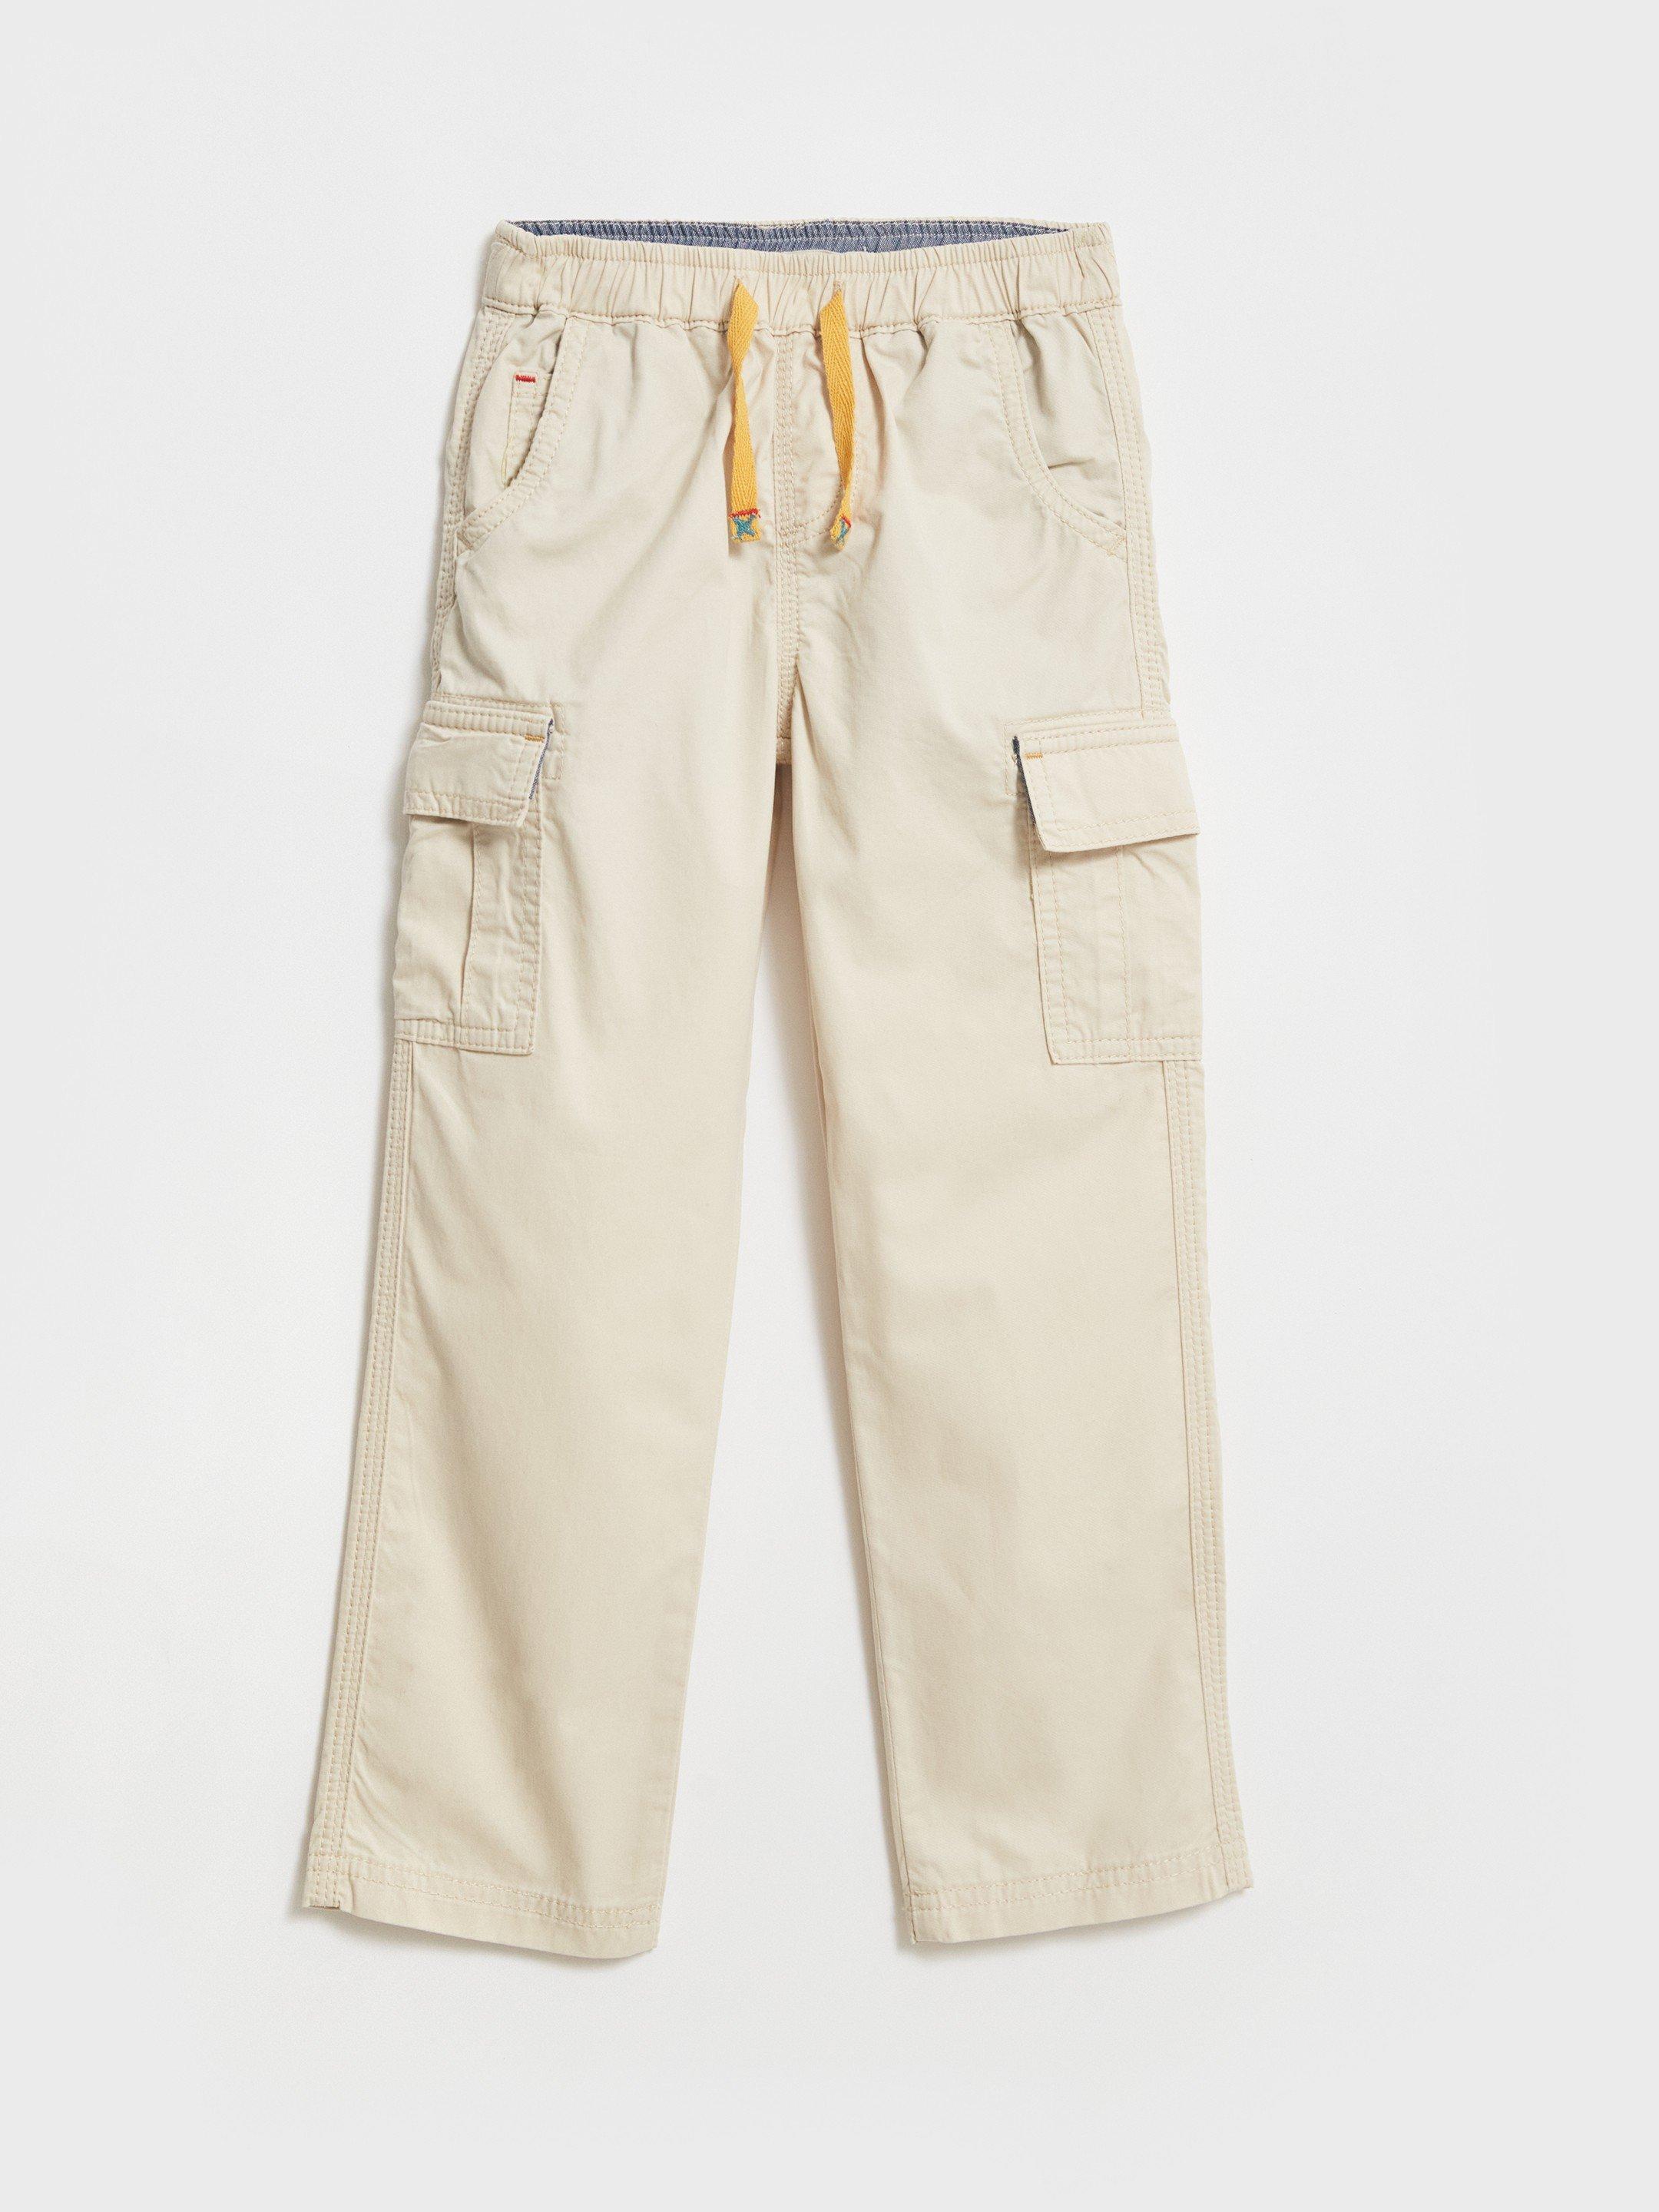 Caleb Cargo Trouser in LGT NAT - FLAT FRONT